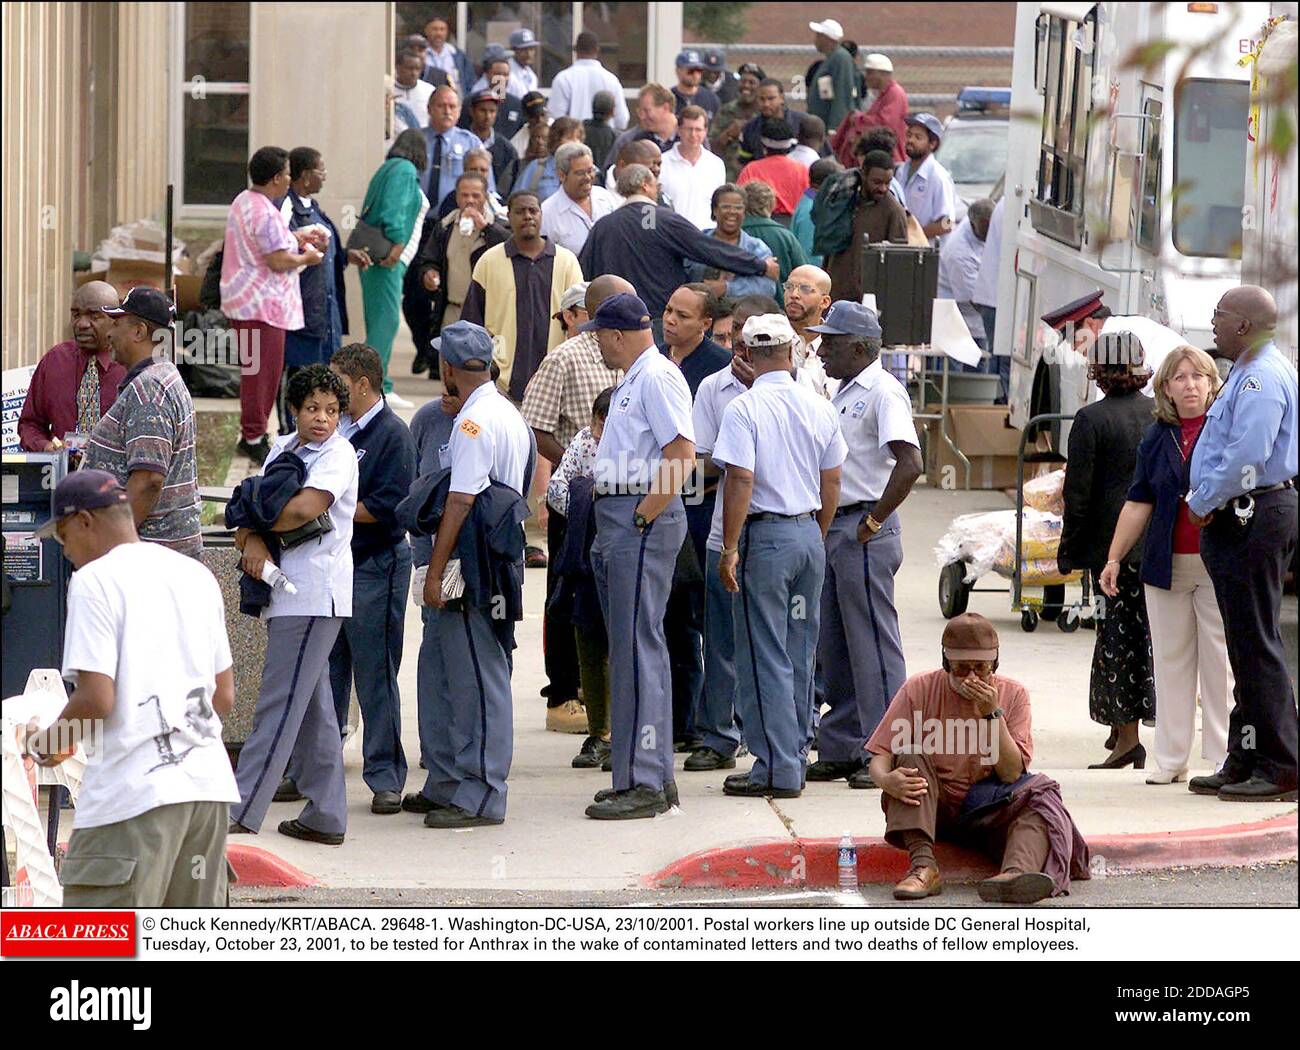 NO FILM, NO VIDEO, NO TV, NO DOCUMENTARY - © Chuck Kennedy/KRT/ABACA. 29648-1. Washington-DC-USA, 23/10/2001. Postal workers line up outside DC General Hospital, Tuesday, October 23, 2001, to be tested for Anthrax in the wake of contaminated letters and two deaths of fellow employees. Stock Photo